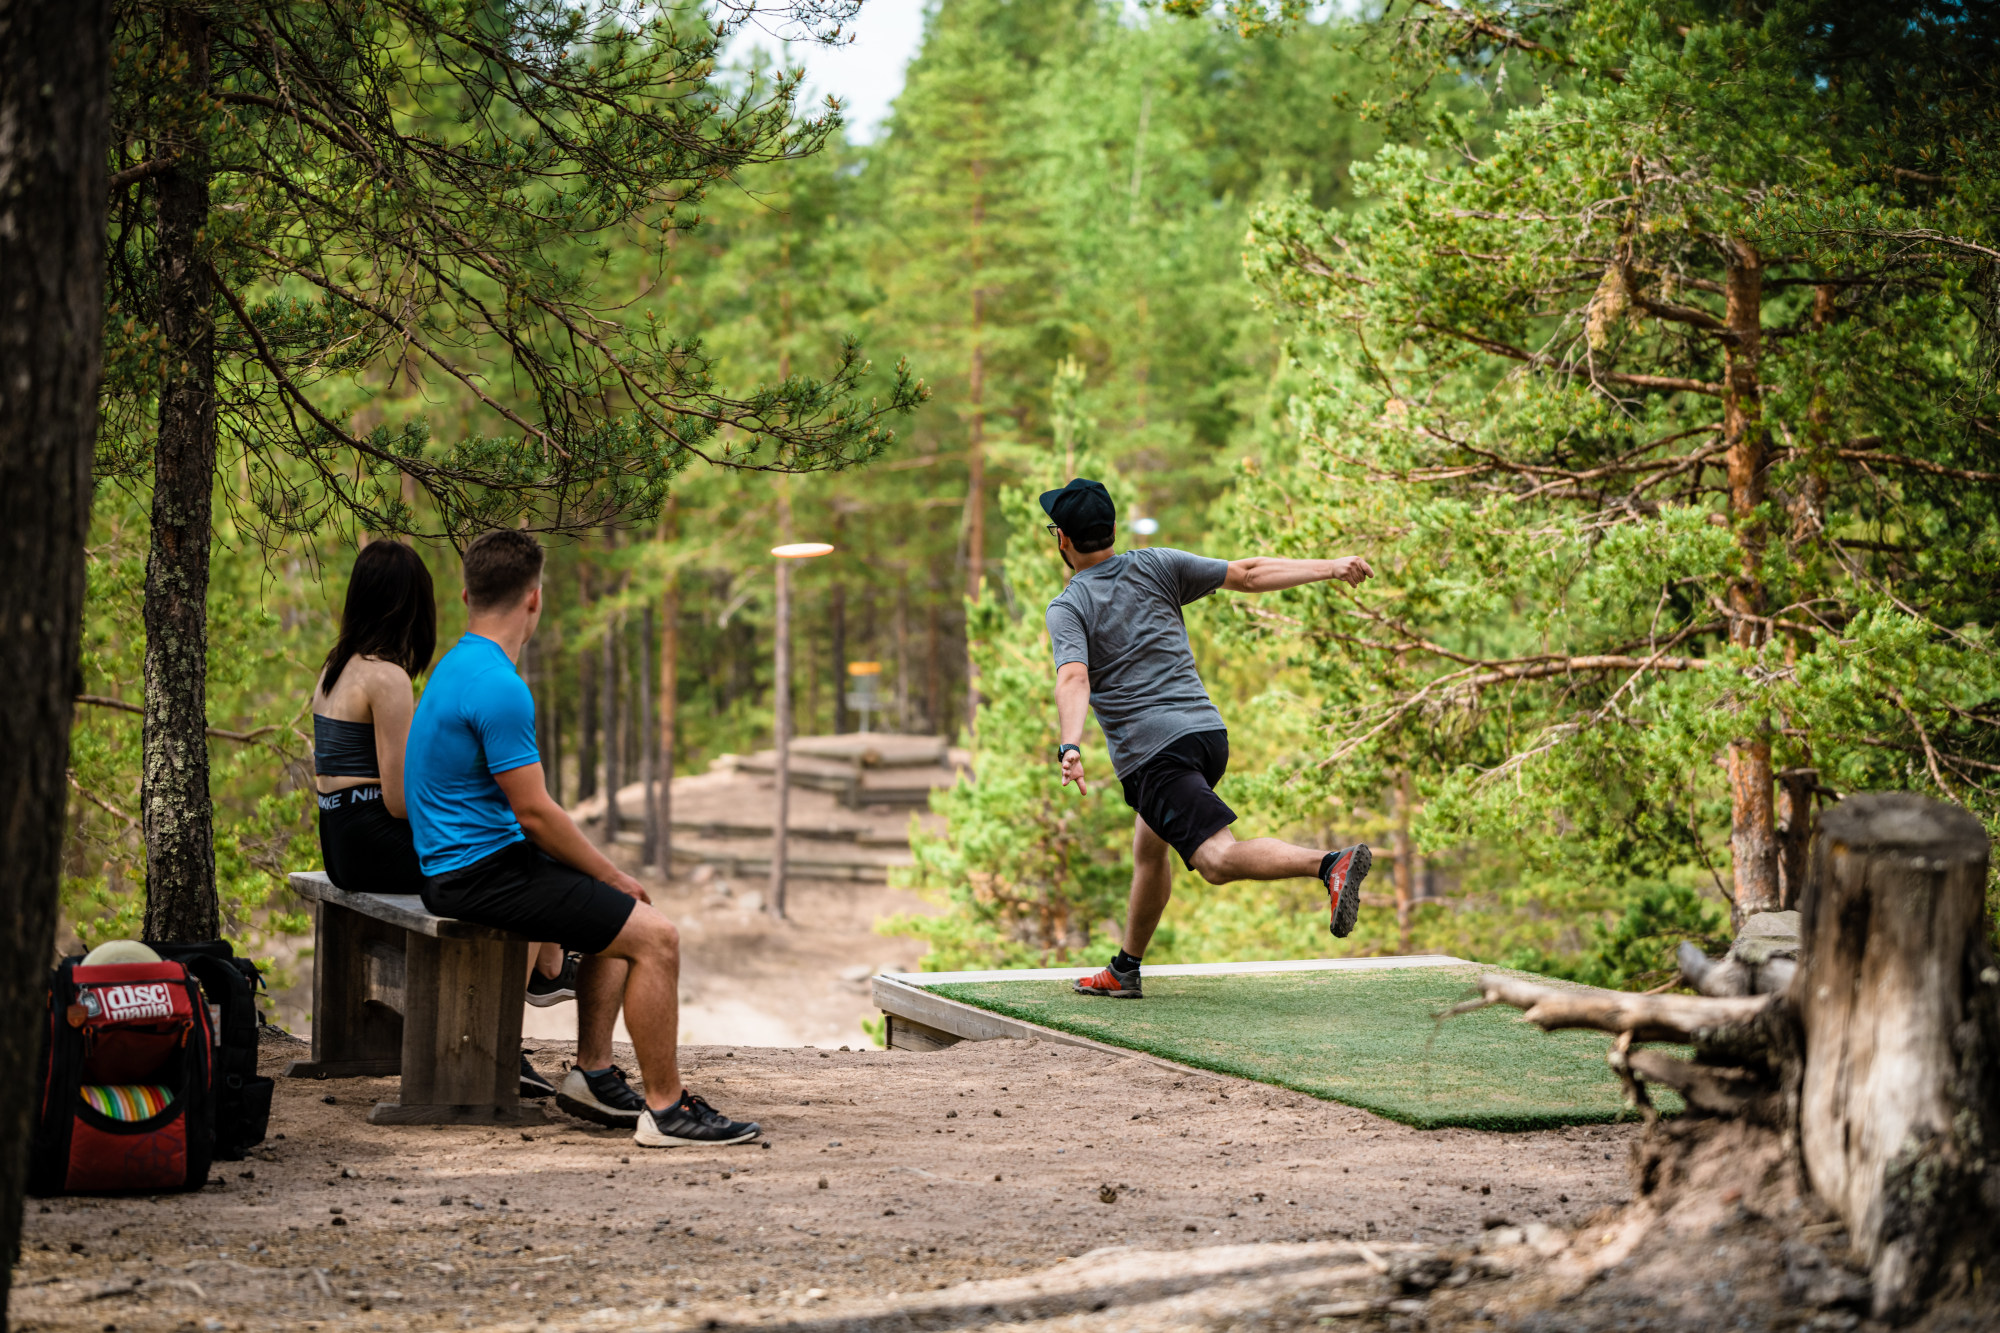 15 Most Common Disc Golf Beginner Mistakes